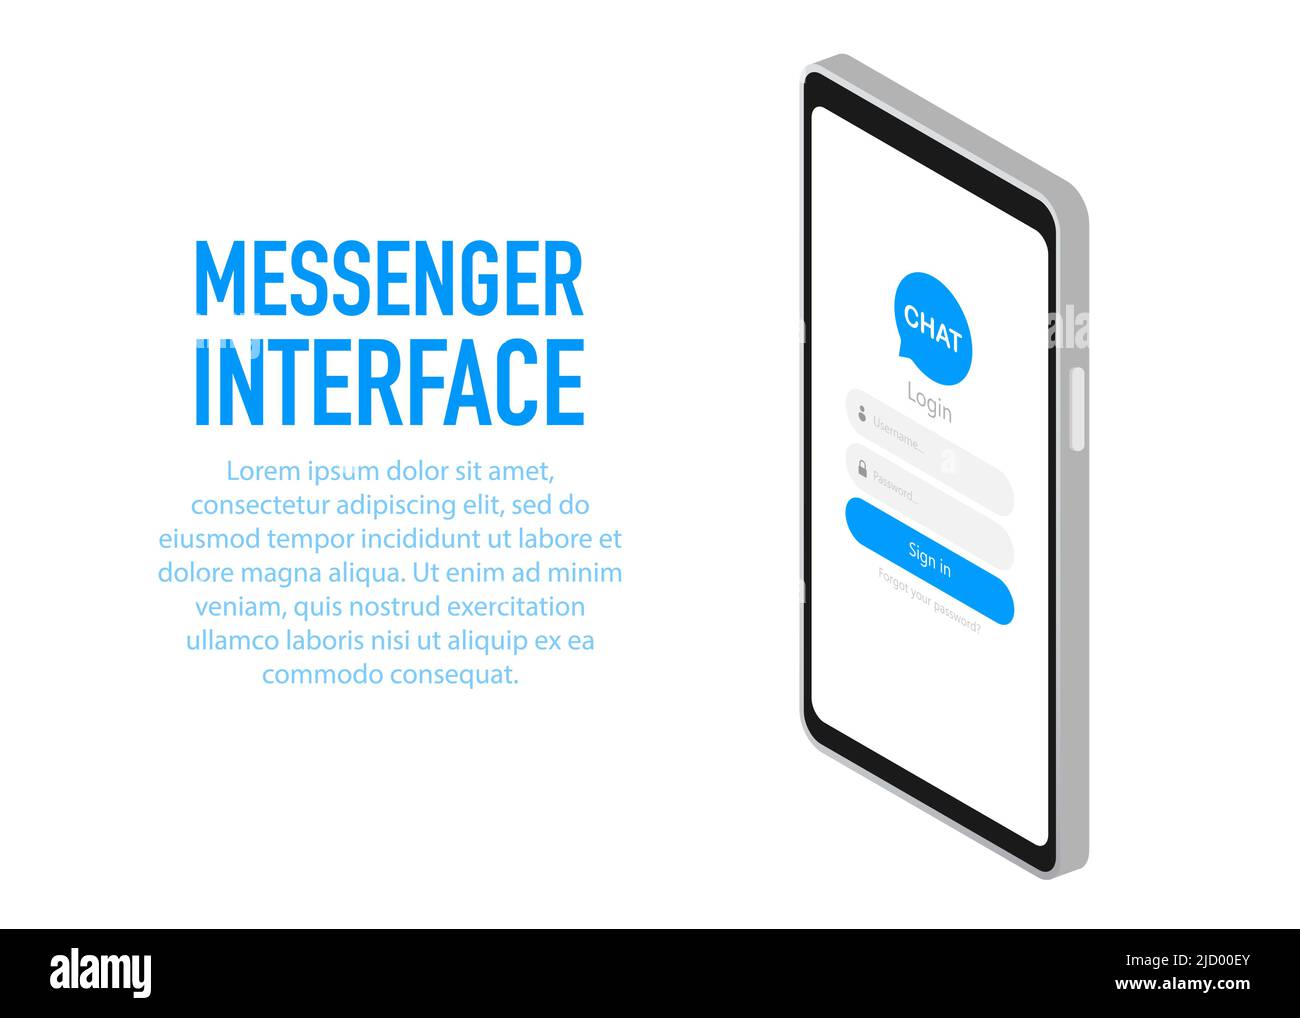 Trendy messenger interface Application with Dialogue window. Sms Messenger. Vector illustration. Stock Vector